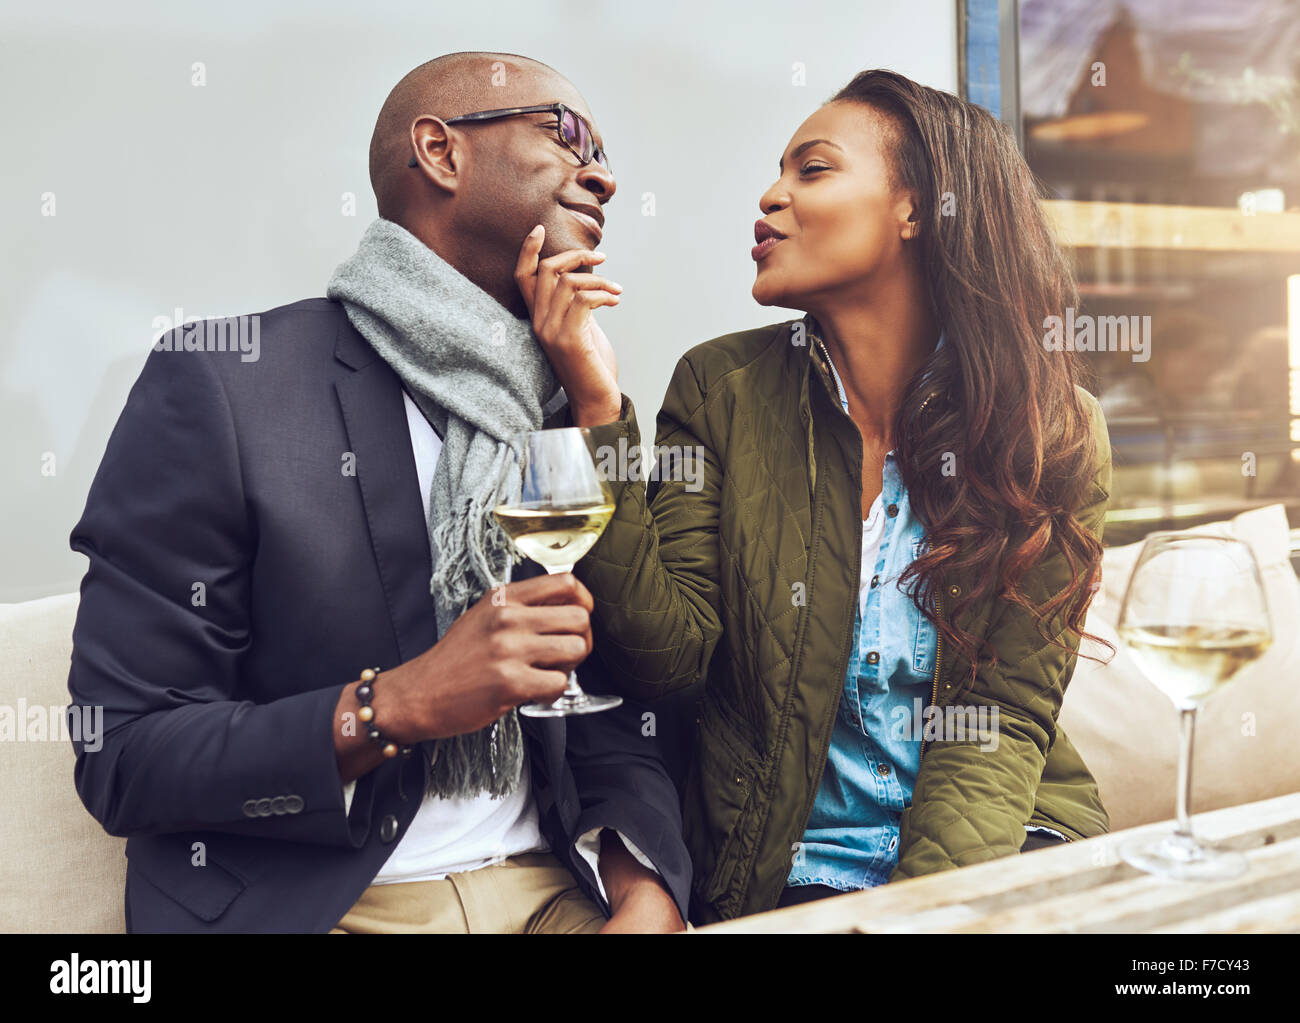 Young attractive African American woman flirting with her boyfriend puckering her lips for a kiss and caressing him on the chin Stock Photo